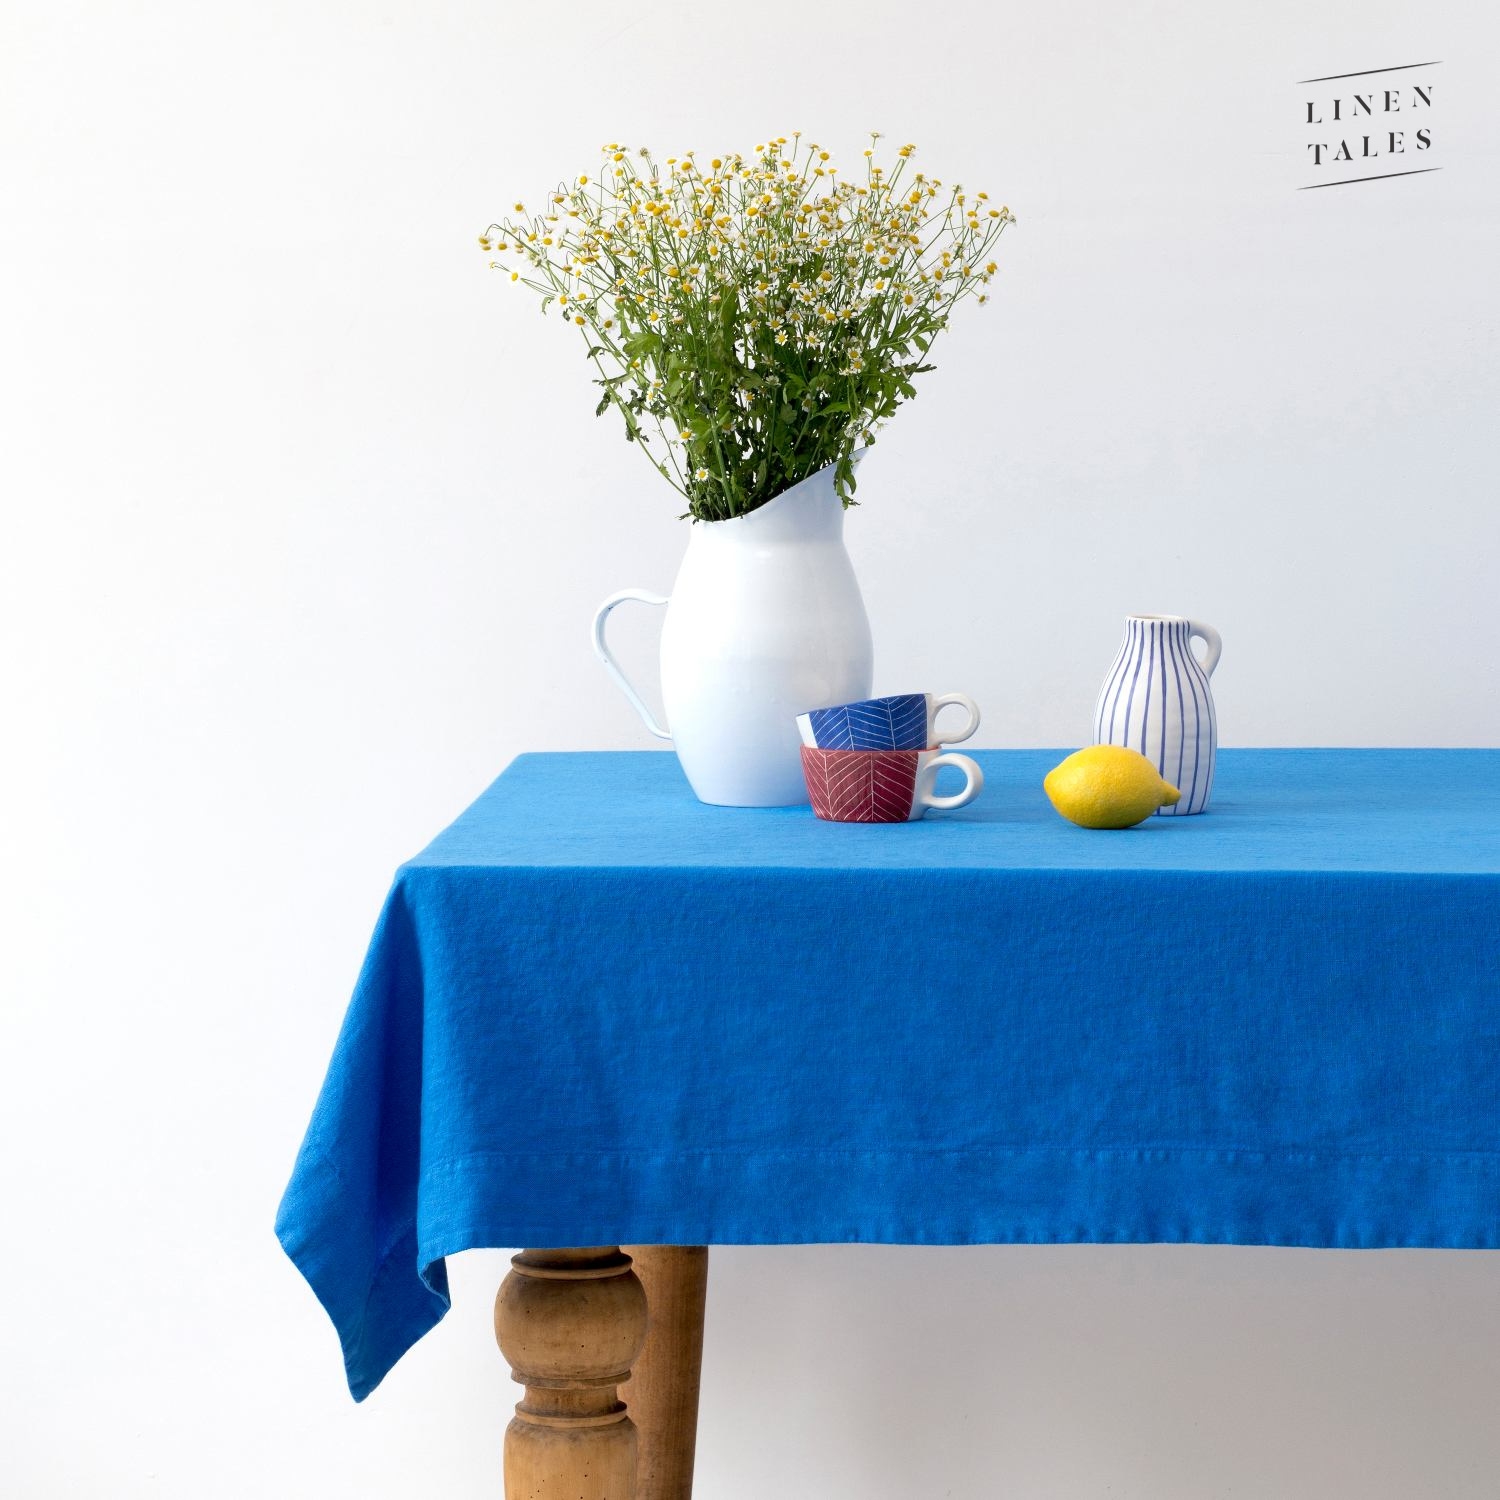 Linen Tales French Blue Linen Tablecloth